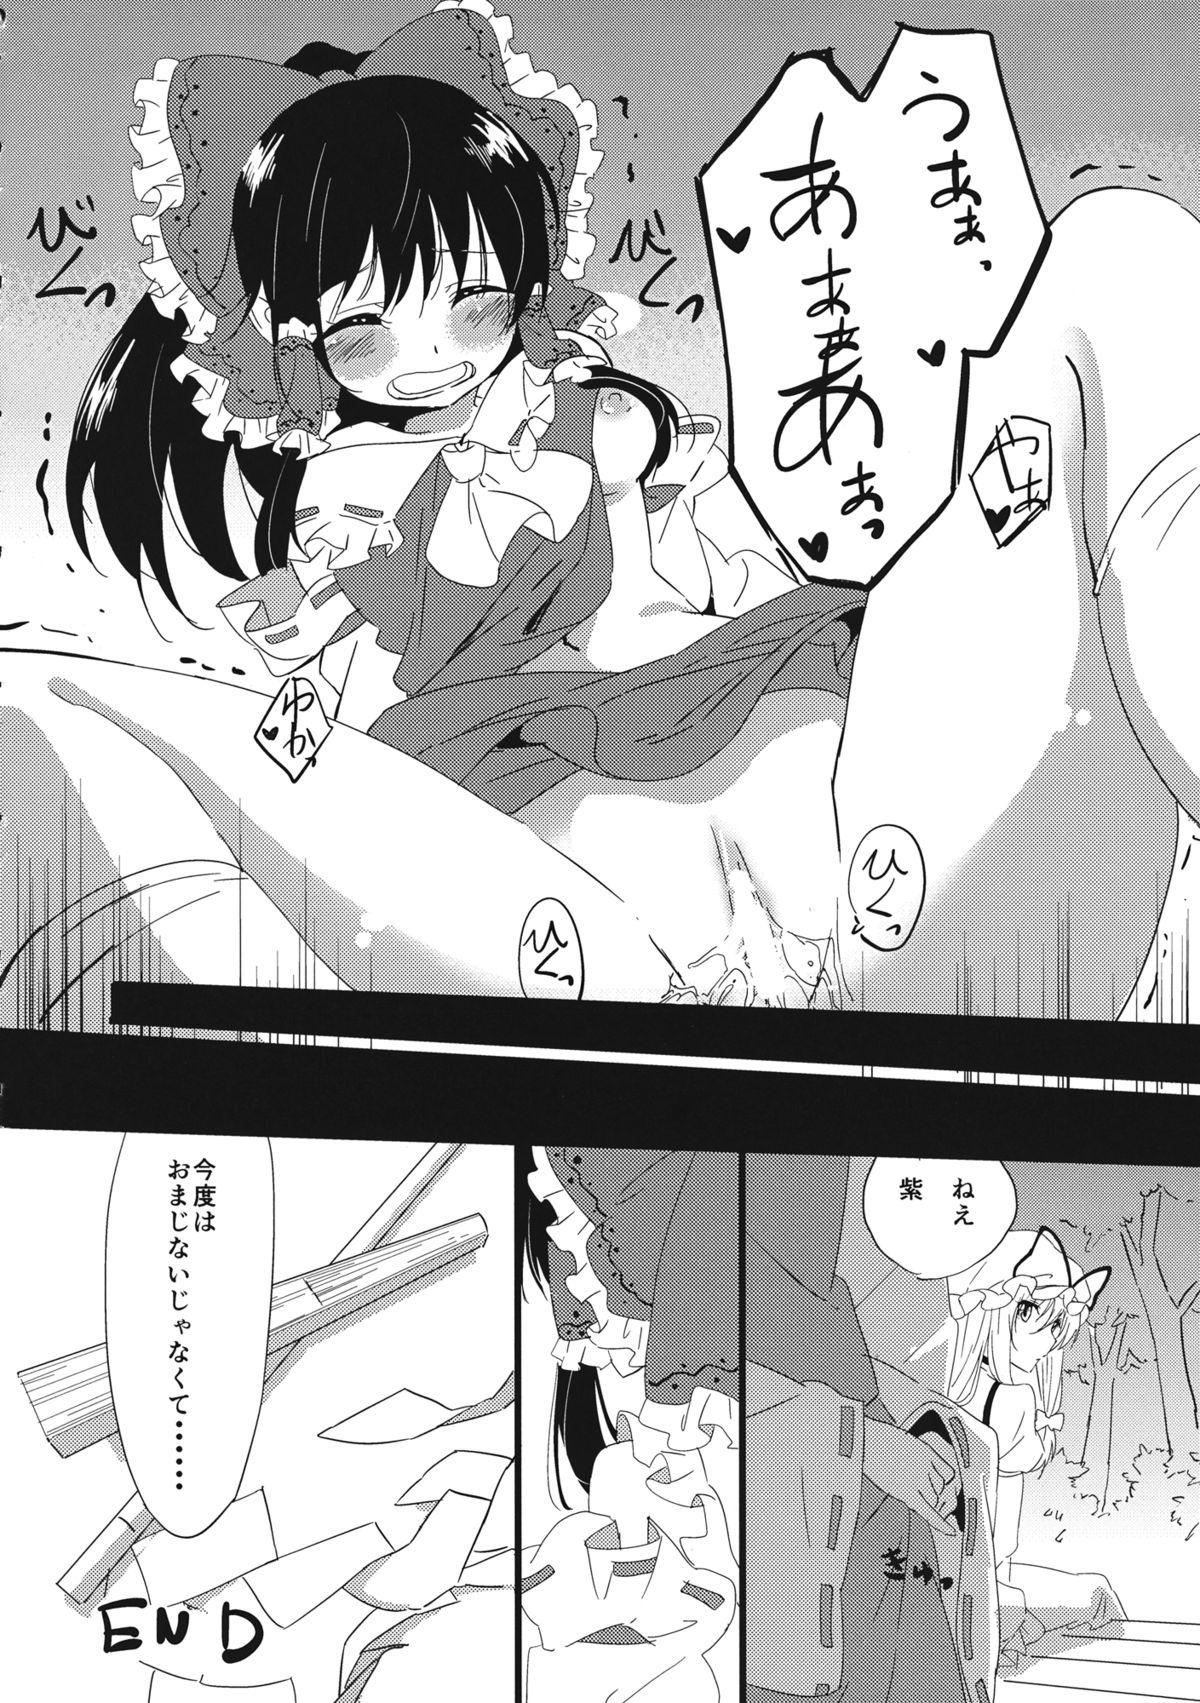 Gloryholes Touhou Muchi Shichu Goudou - Toho joint magazine sex in the ignorant situations - Touhou project Teenage Girl Porn - Page 8